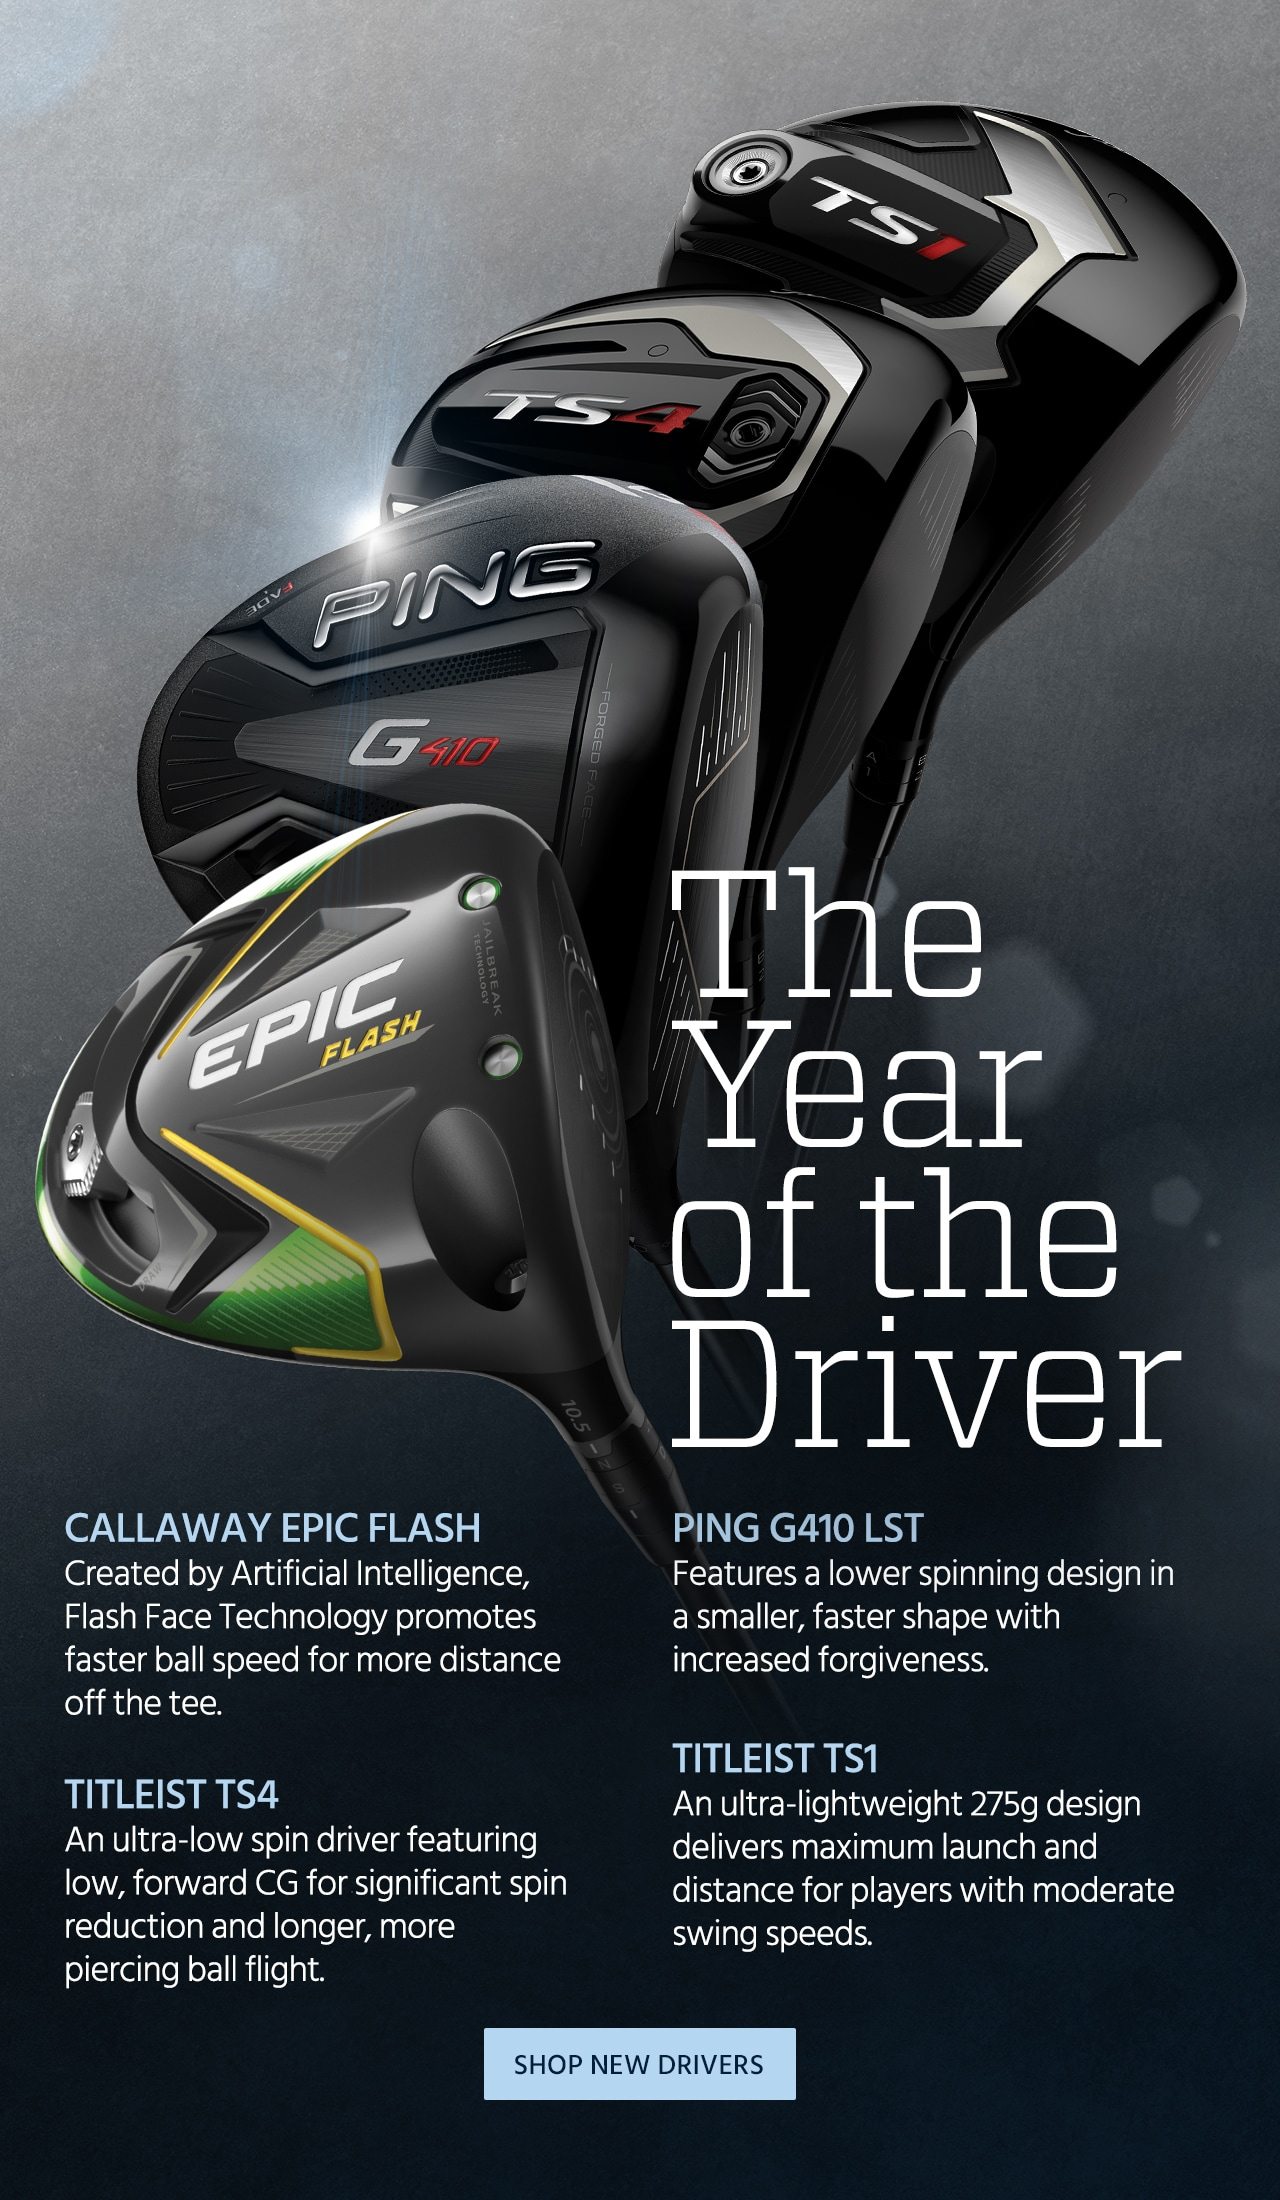 The Year of the Driver. Callaway Epic Flash. Created by Artificial Intelligence, Flash Face Technology promotes faster ball speed for more distance off the tee. PING G410 LST. Features a lower spinning design in a smaller, faster shape with increased forgiveness. Titleist TS1. An ultra-lightweight 275g design delivers maximum launch and distance for players with moderate swing speeds. TITLEIST TS4. An ultra-low spin driver featuring low, forward CG for significant spin reduction and longer, more piercing ball flight. Shop Now.